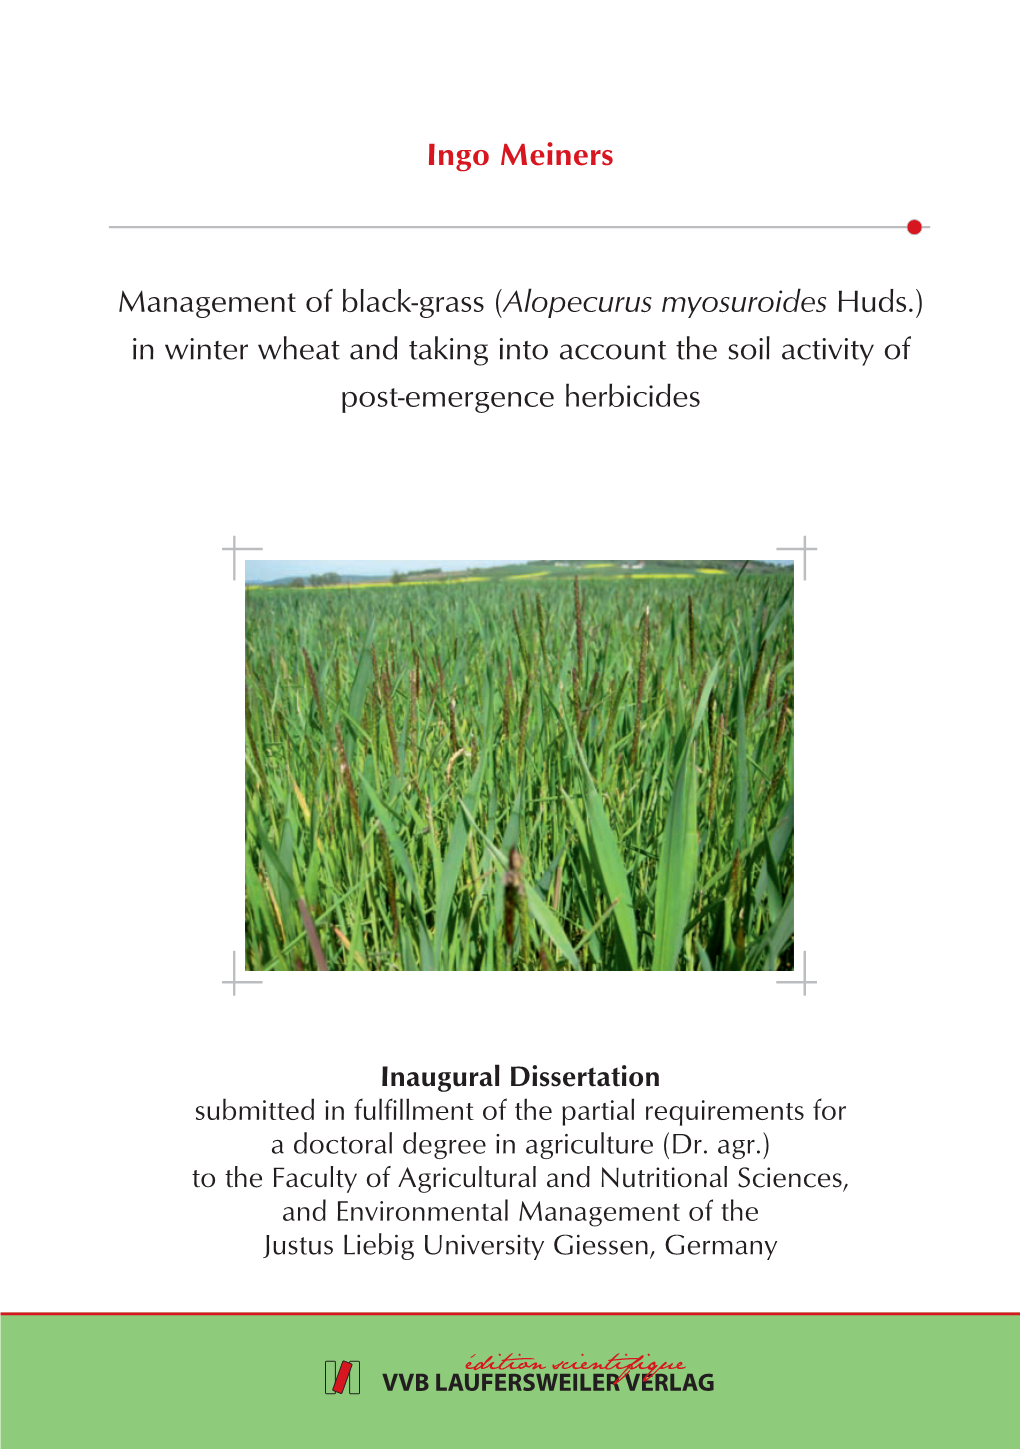 Management of Black-Grass (Alopecurus Myosuroides Huds.) in Winter Wheat and Taking Into Account the Soil Activity of Post-Emergence Herbicides